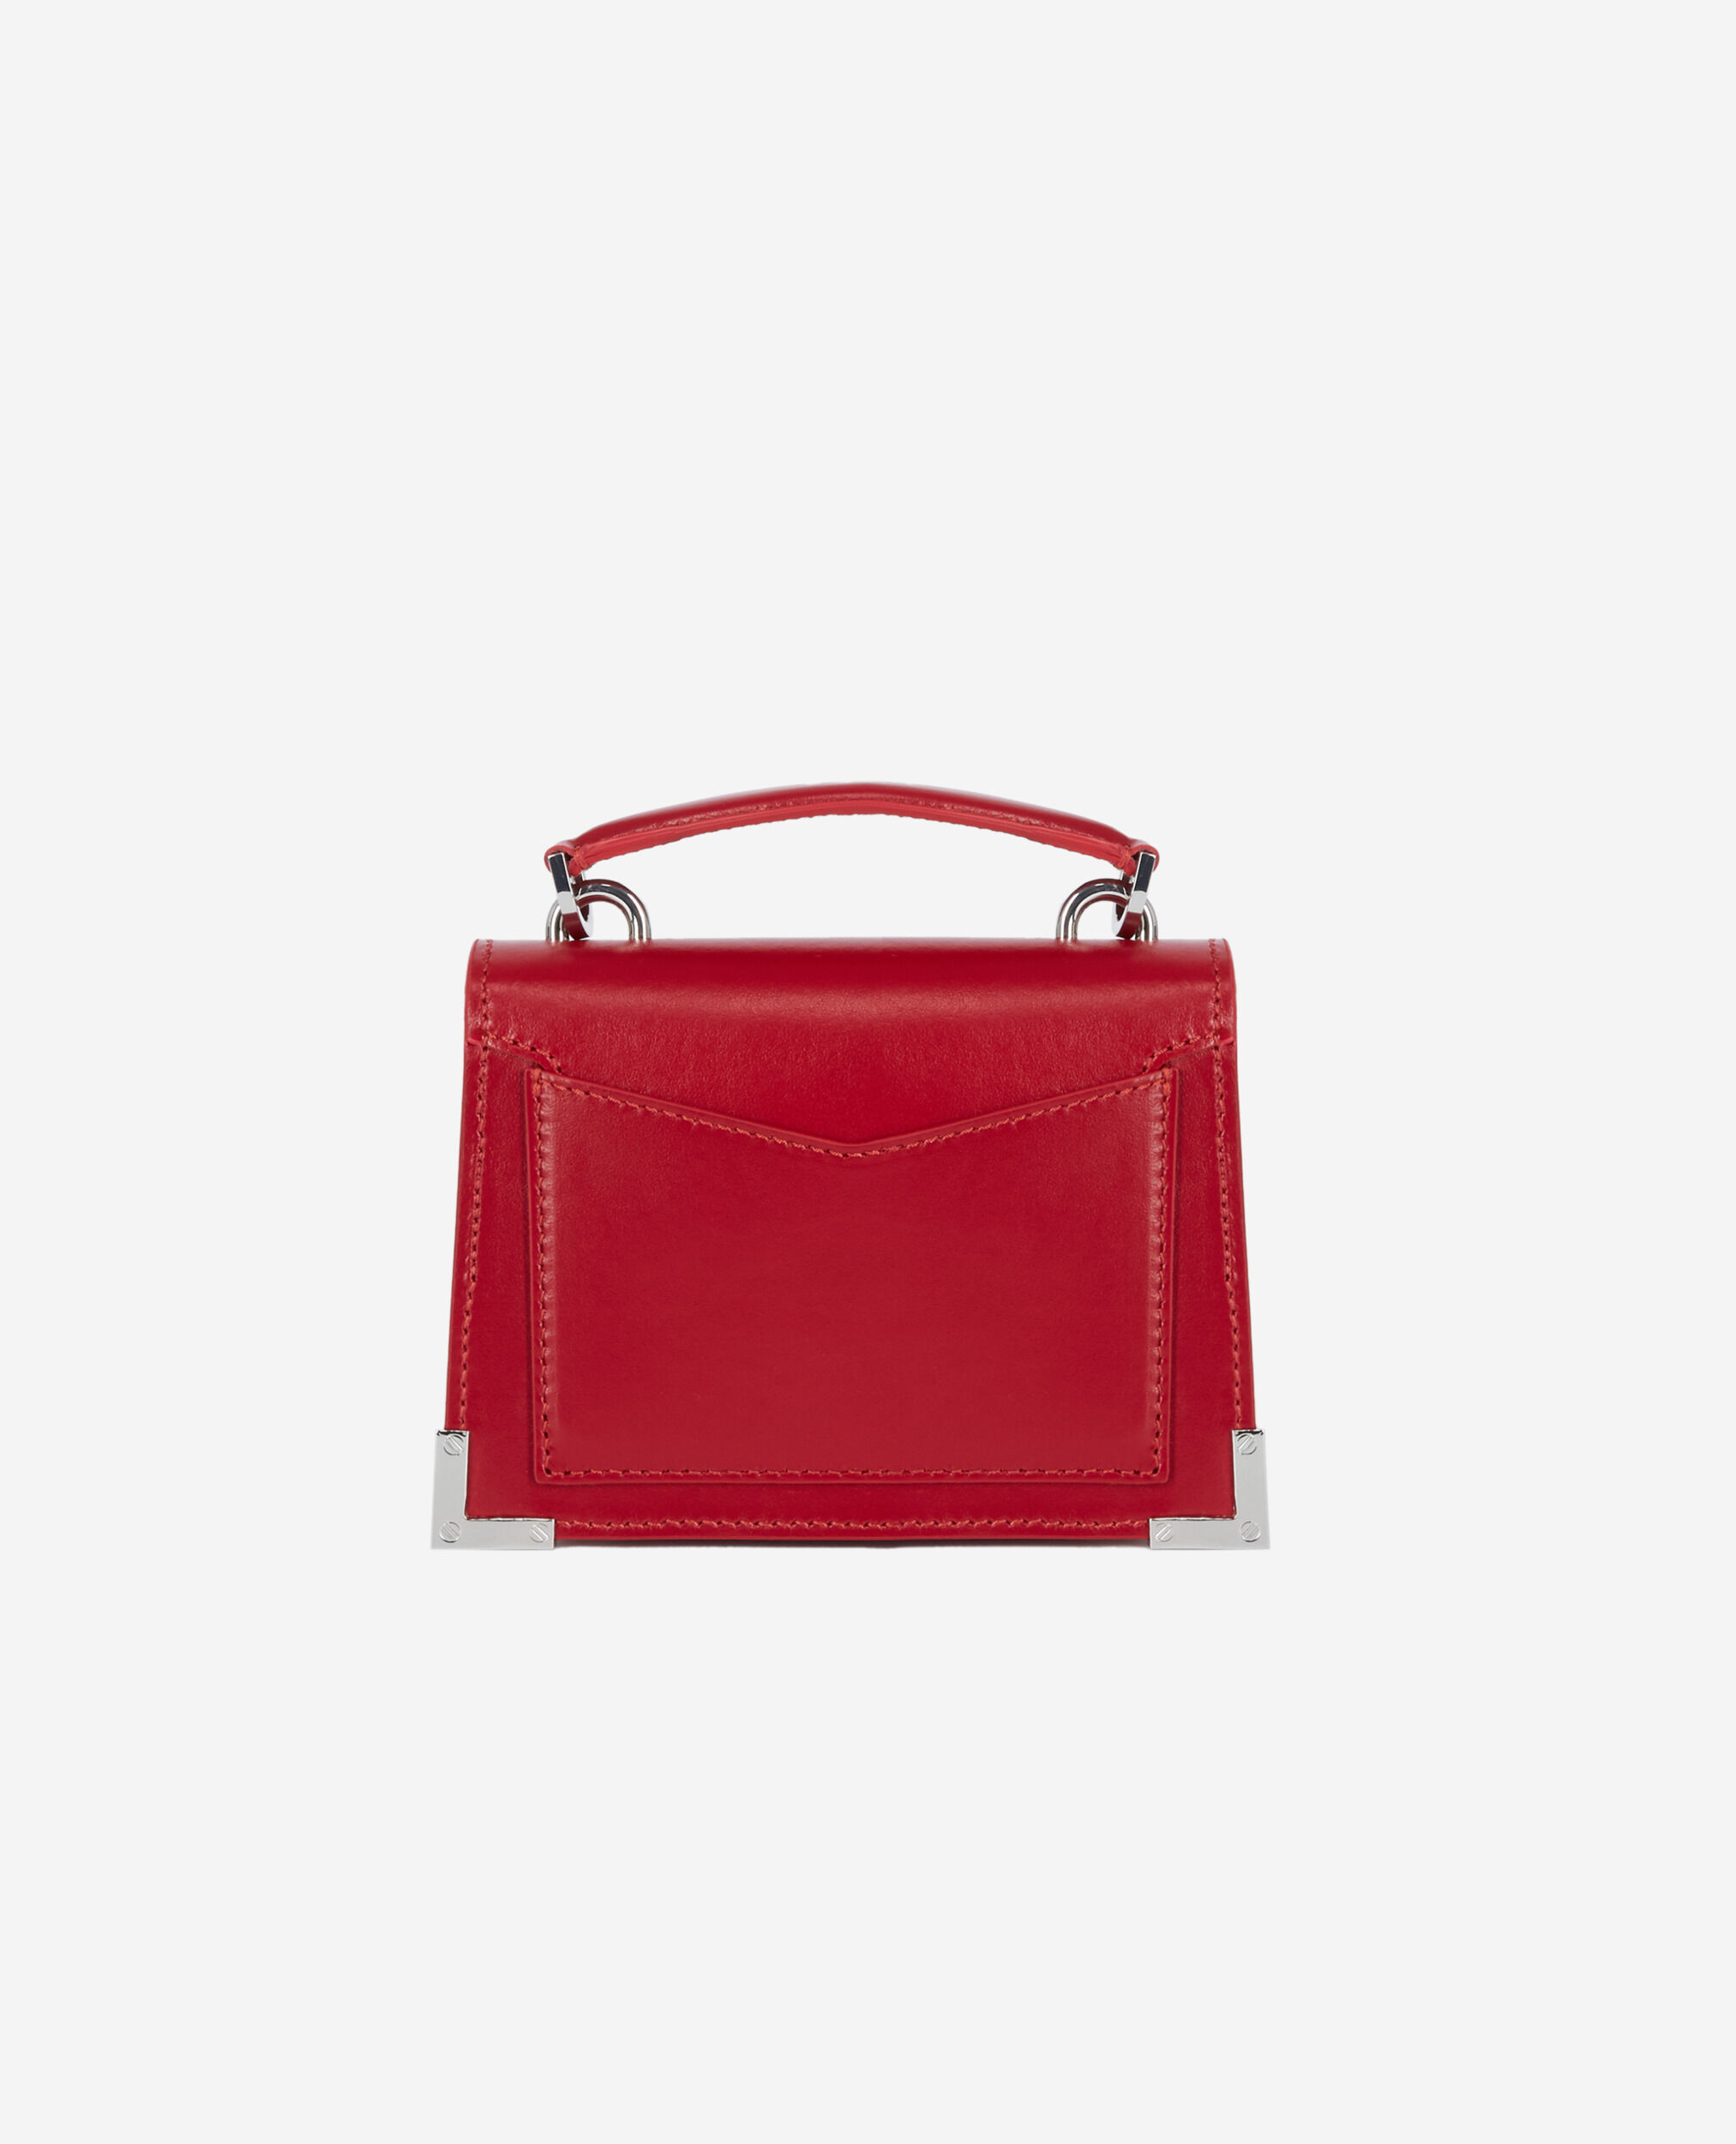 Nano Emily bag in red leather, DARK CHERRY, hi-res image number null